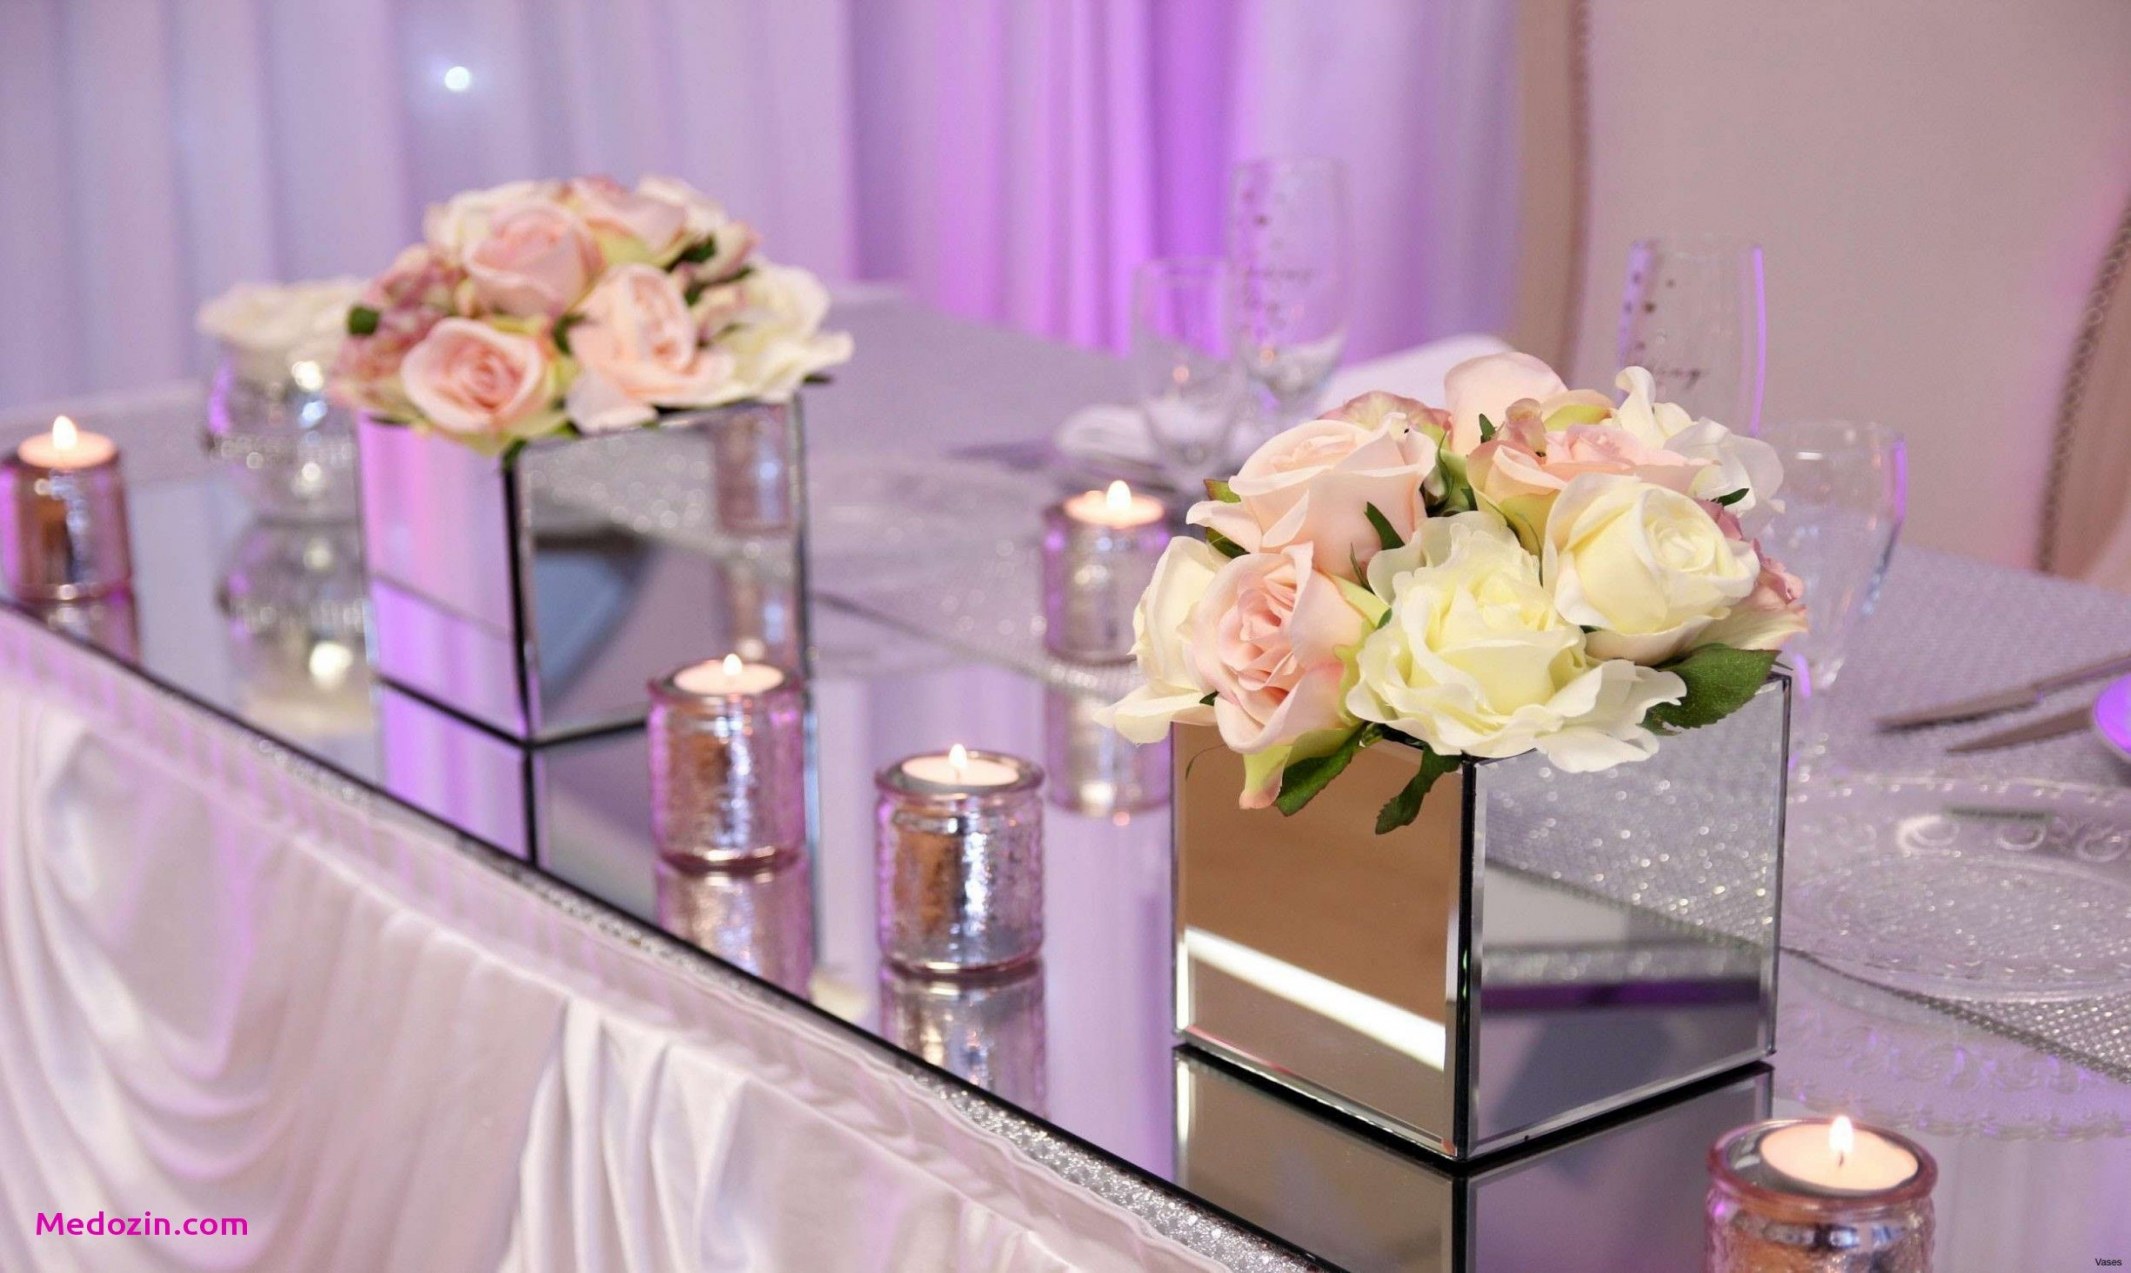 wedding table decorations mirrored square vase 3h vases mirror table decorationi 0d of wedding table decorations